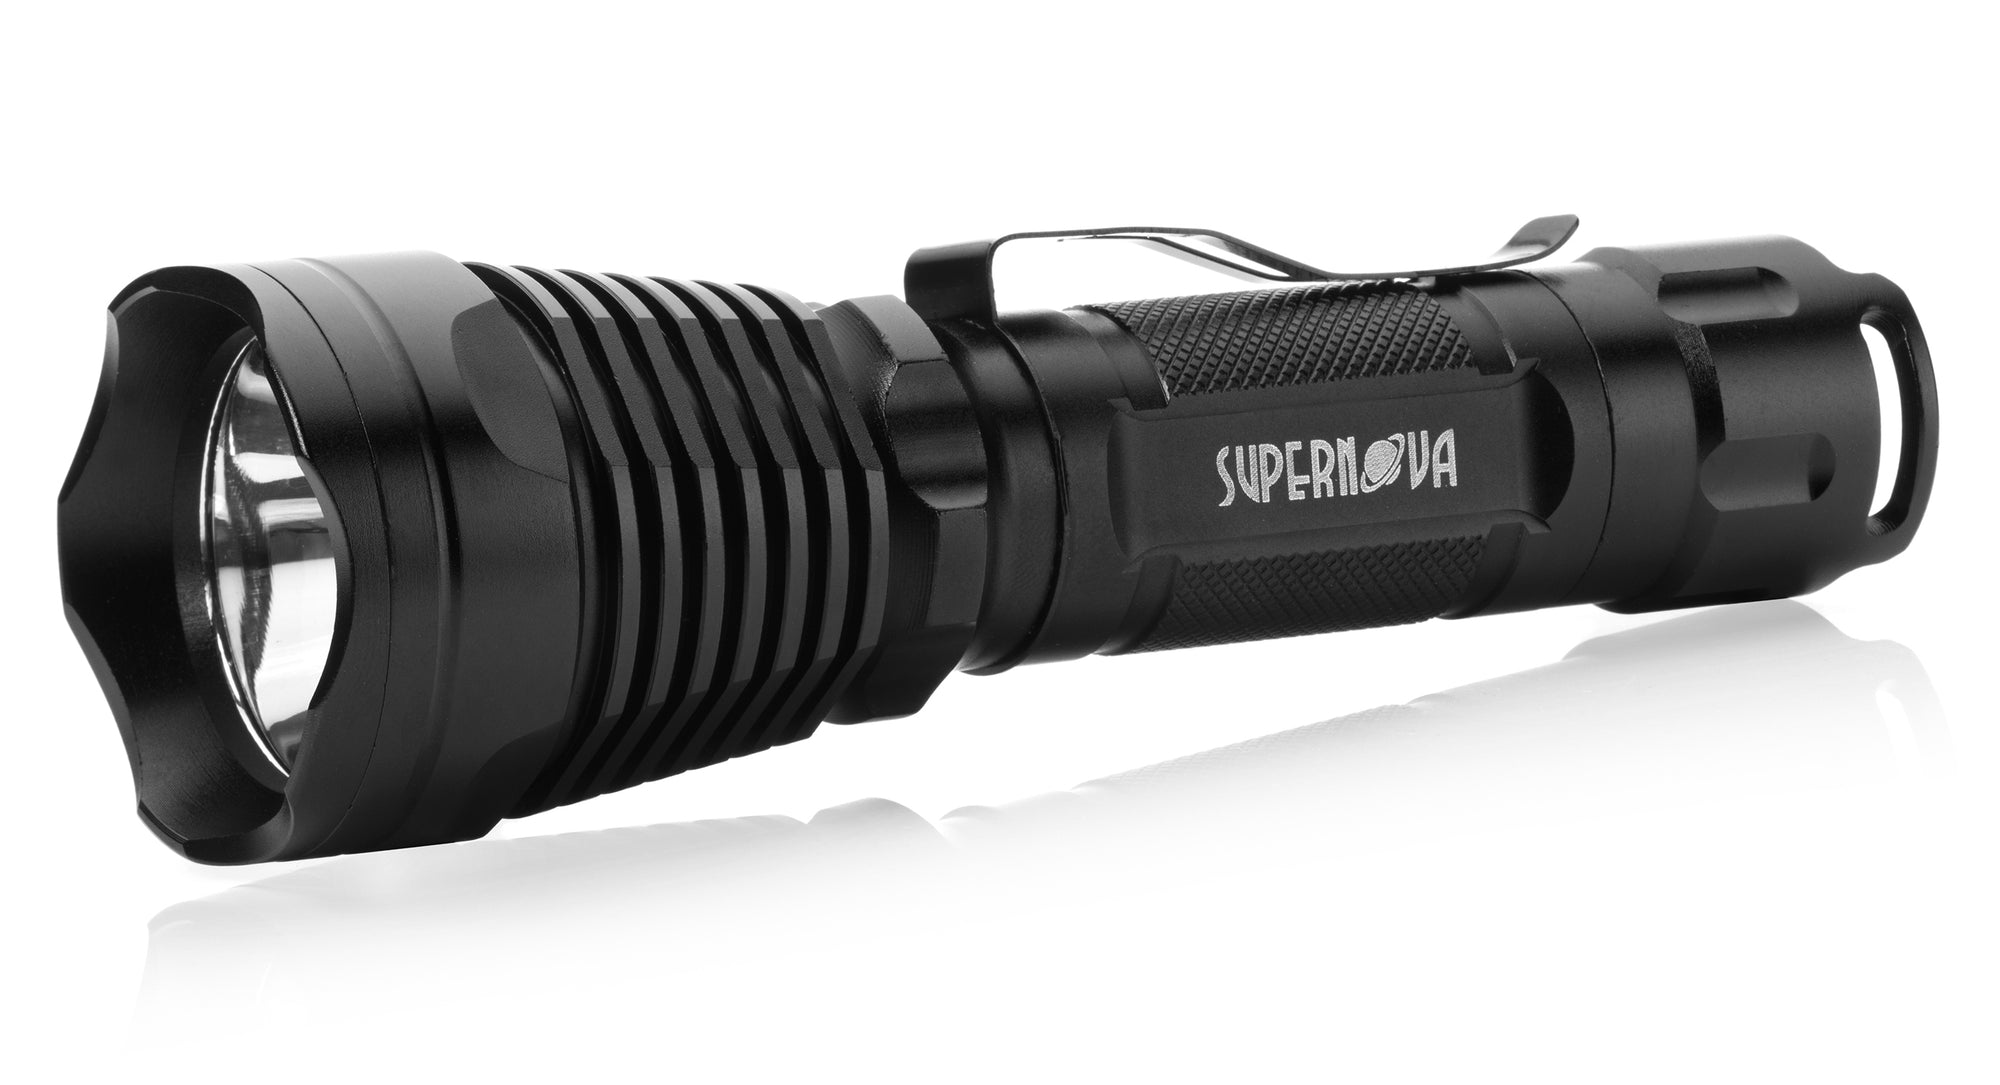 Replacement Supernova Guardian 1300TL | Tactical Flashlight Only